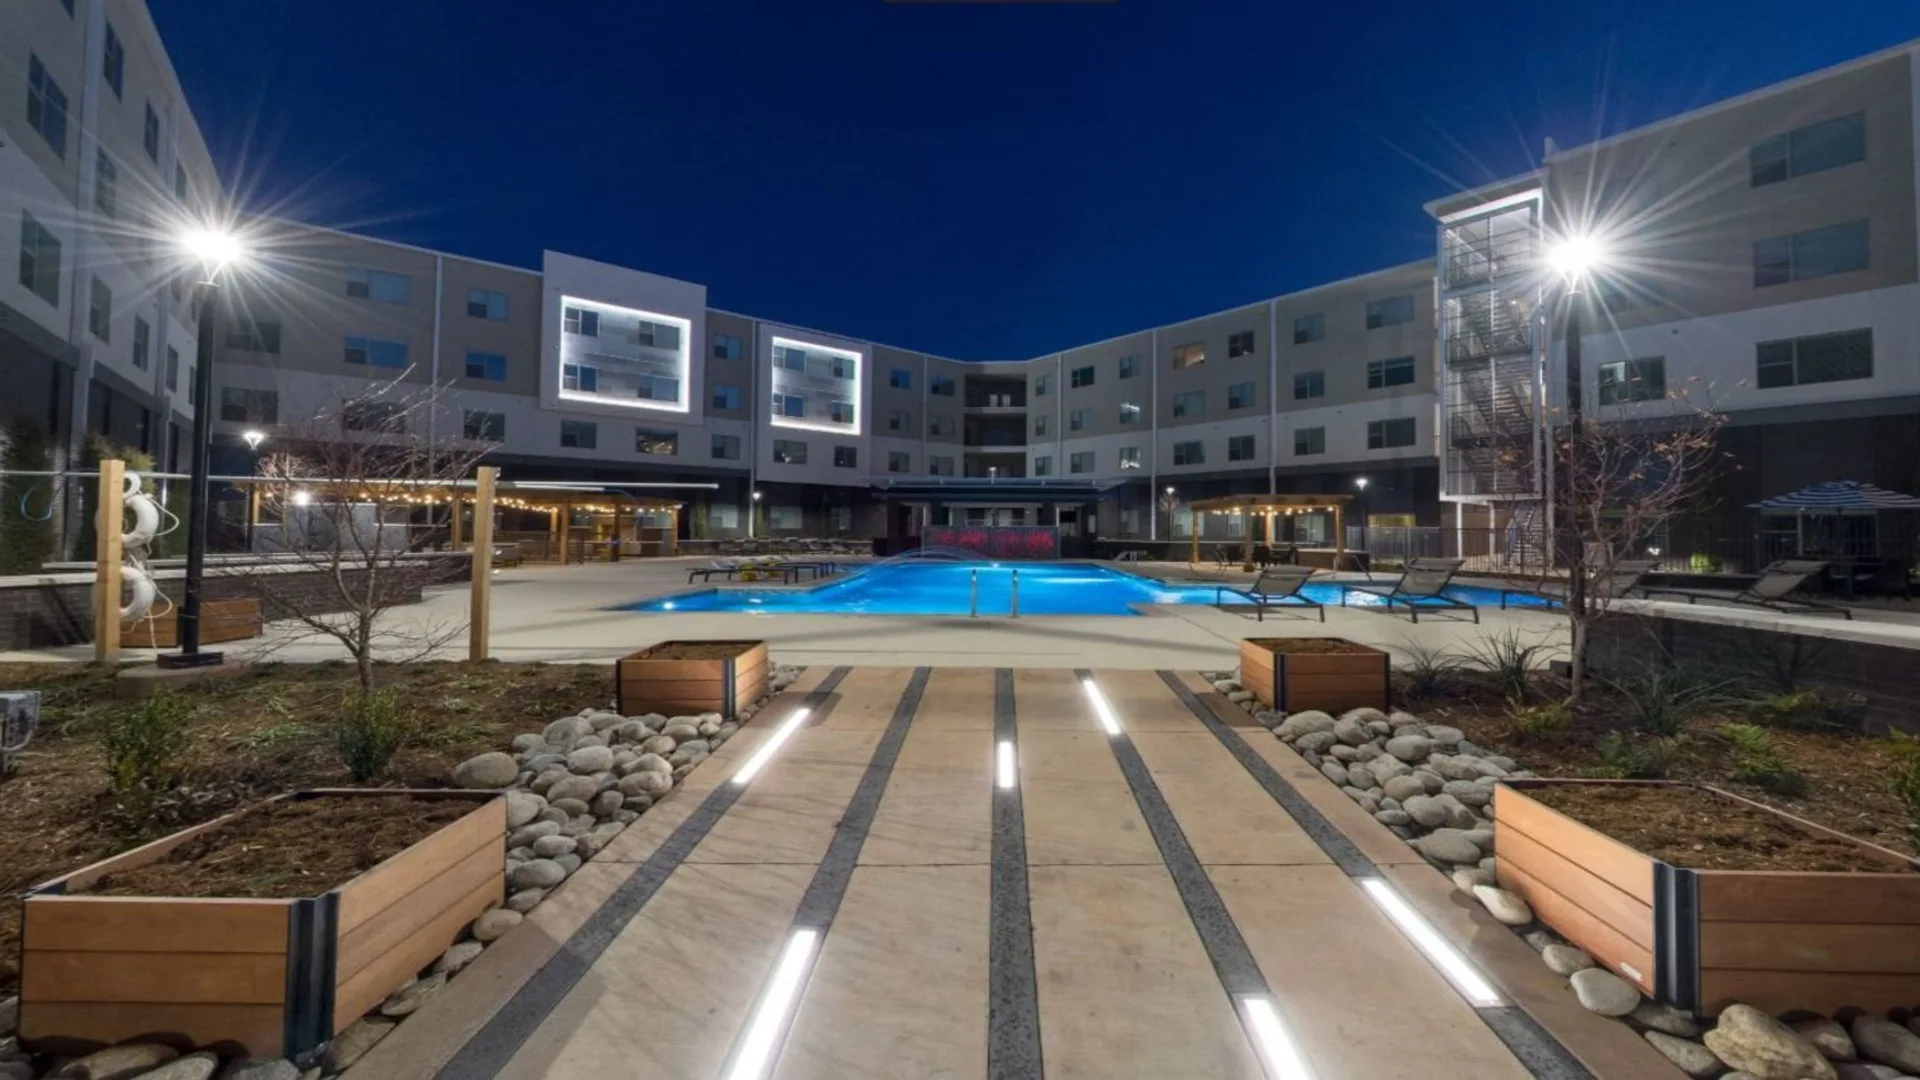 the courtyard at night with a pool and lighting at The Argon